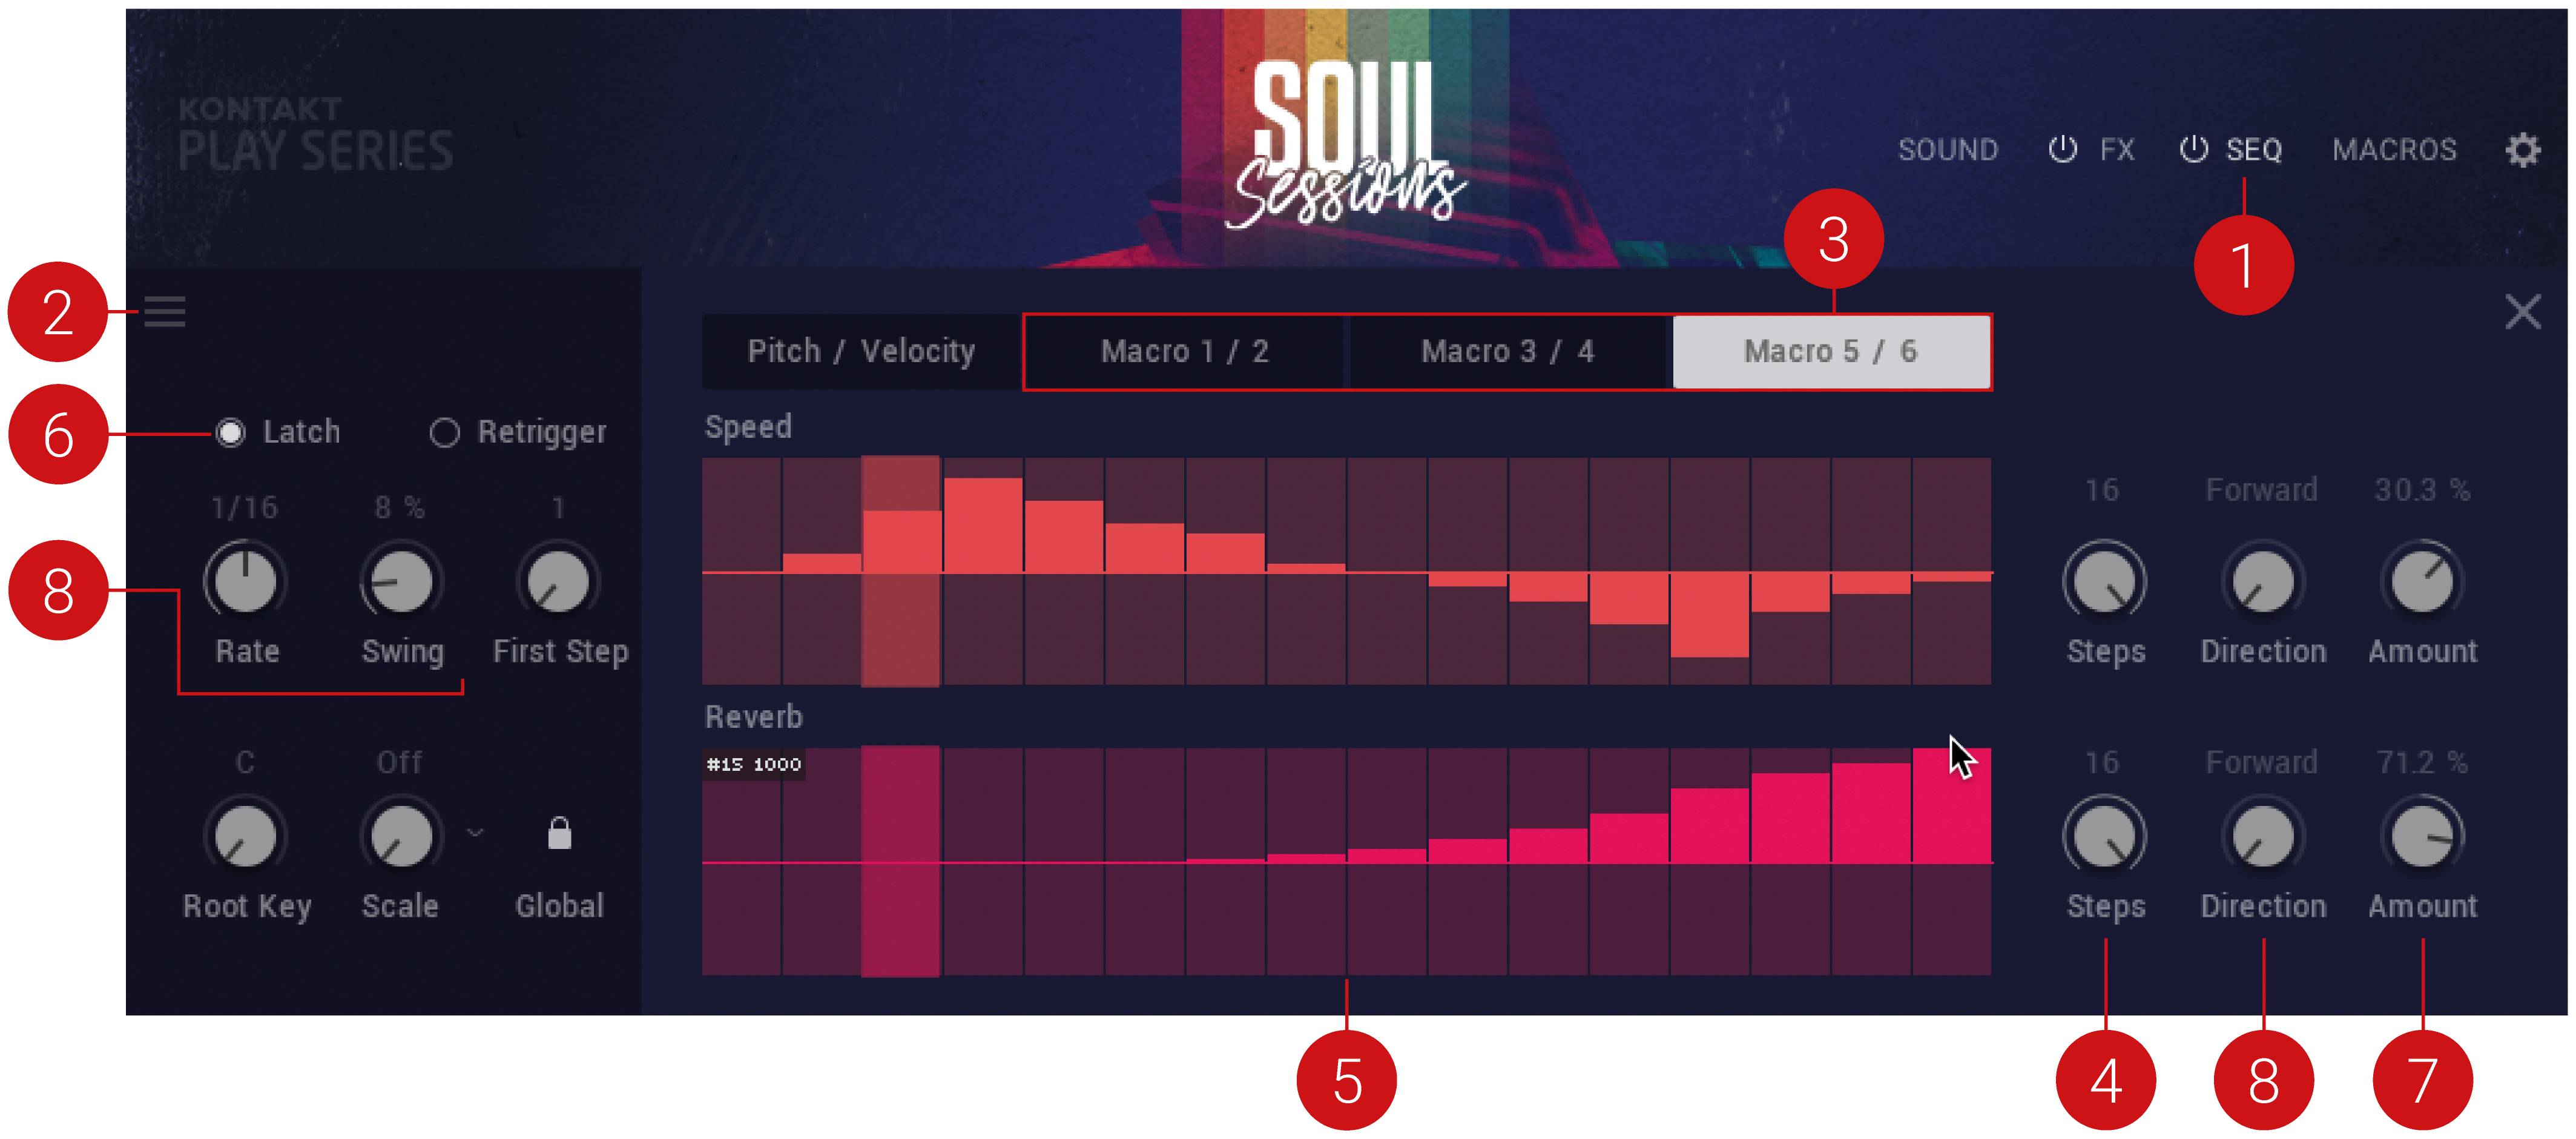 Soul_Sessions_Sequencing_Macros.png